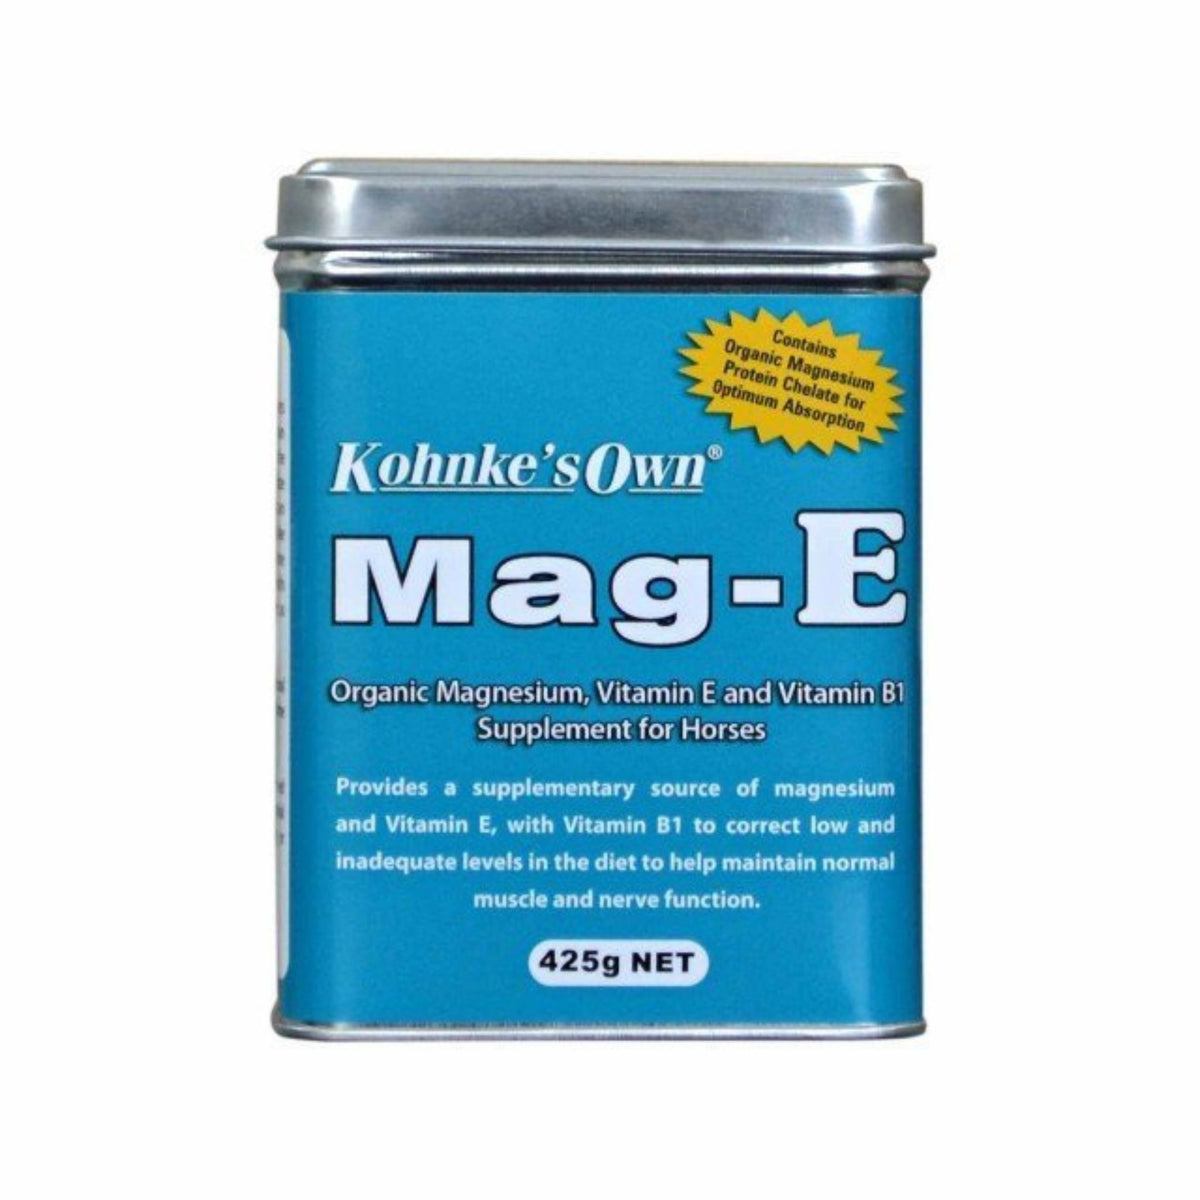 Small rectangular tin of Mag-E with blue label and white text.